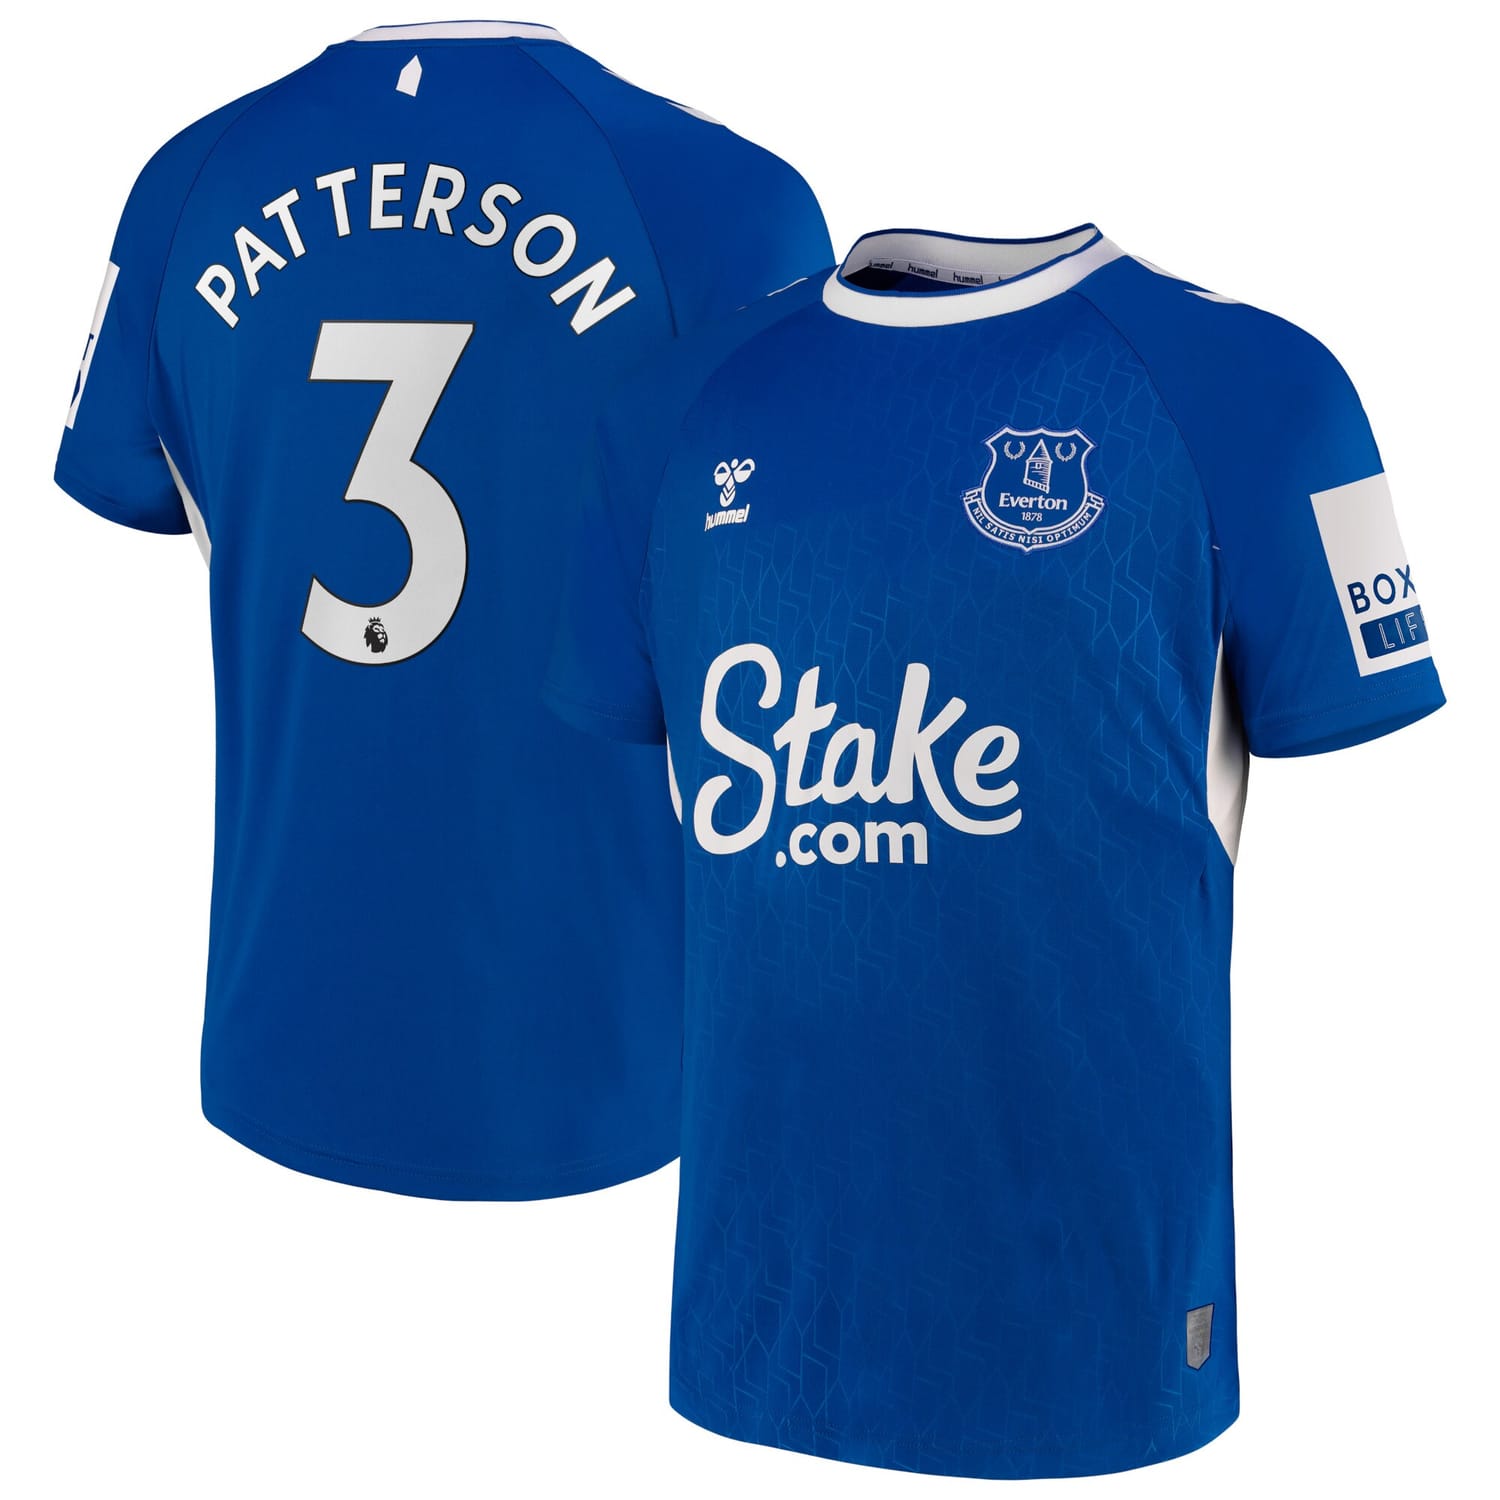 Premier League Everton Home Jersey Shirt 2022-23 player Nathan Patterson 3 printing for Men